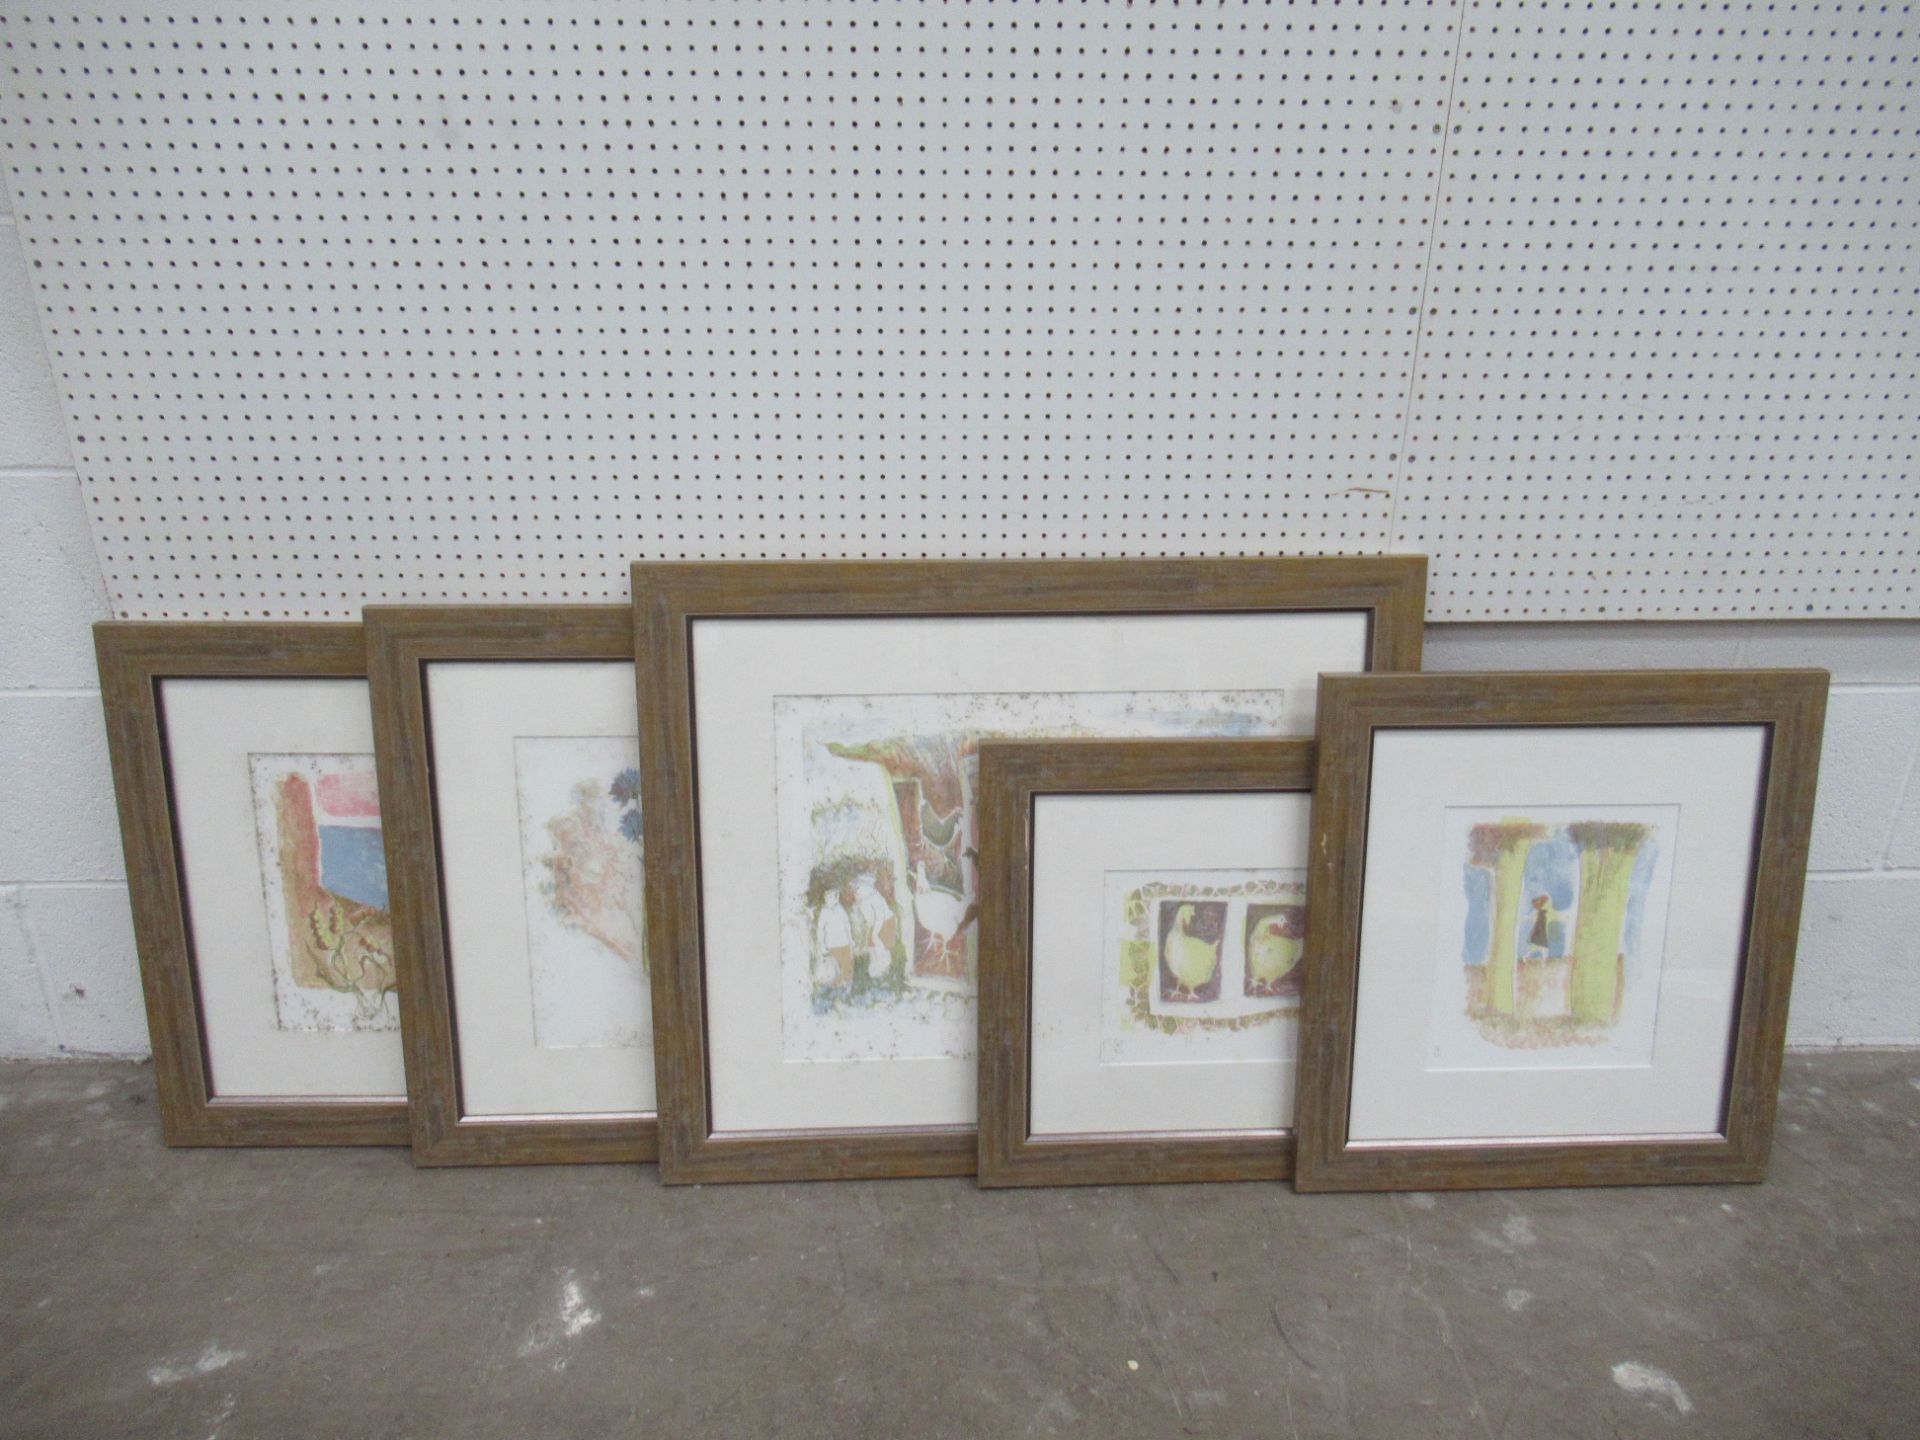 5x Tessa Newcomb Lithographs - sizes vary